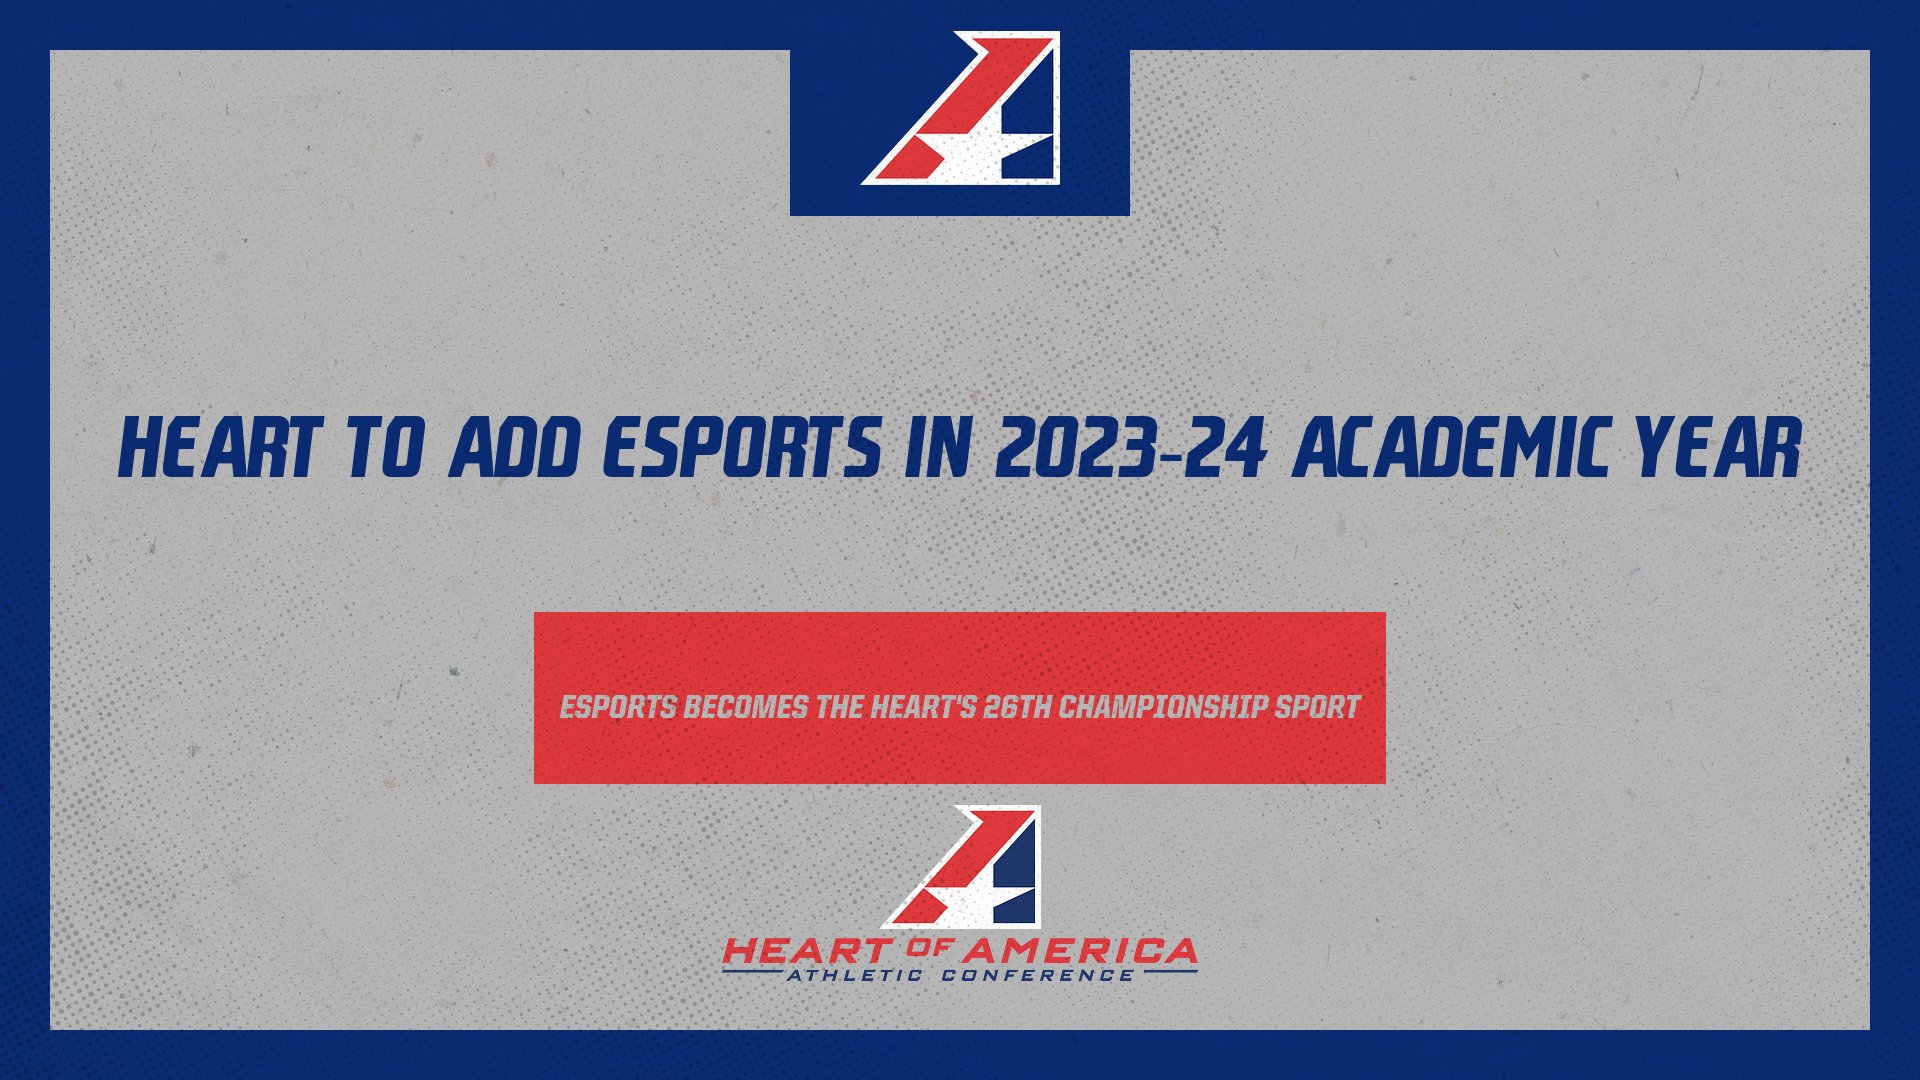 St. Ambrose to join Heart of America Conference in Esports